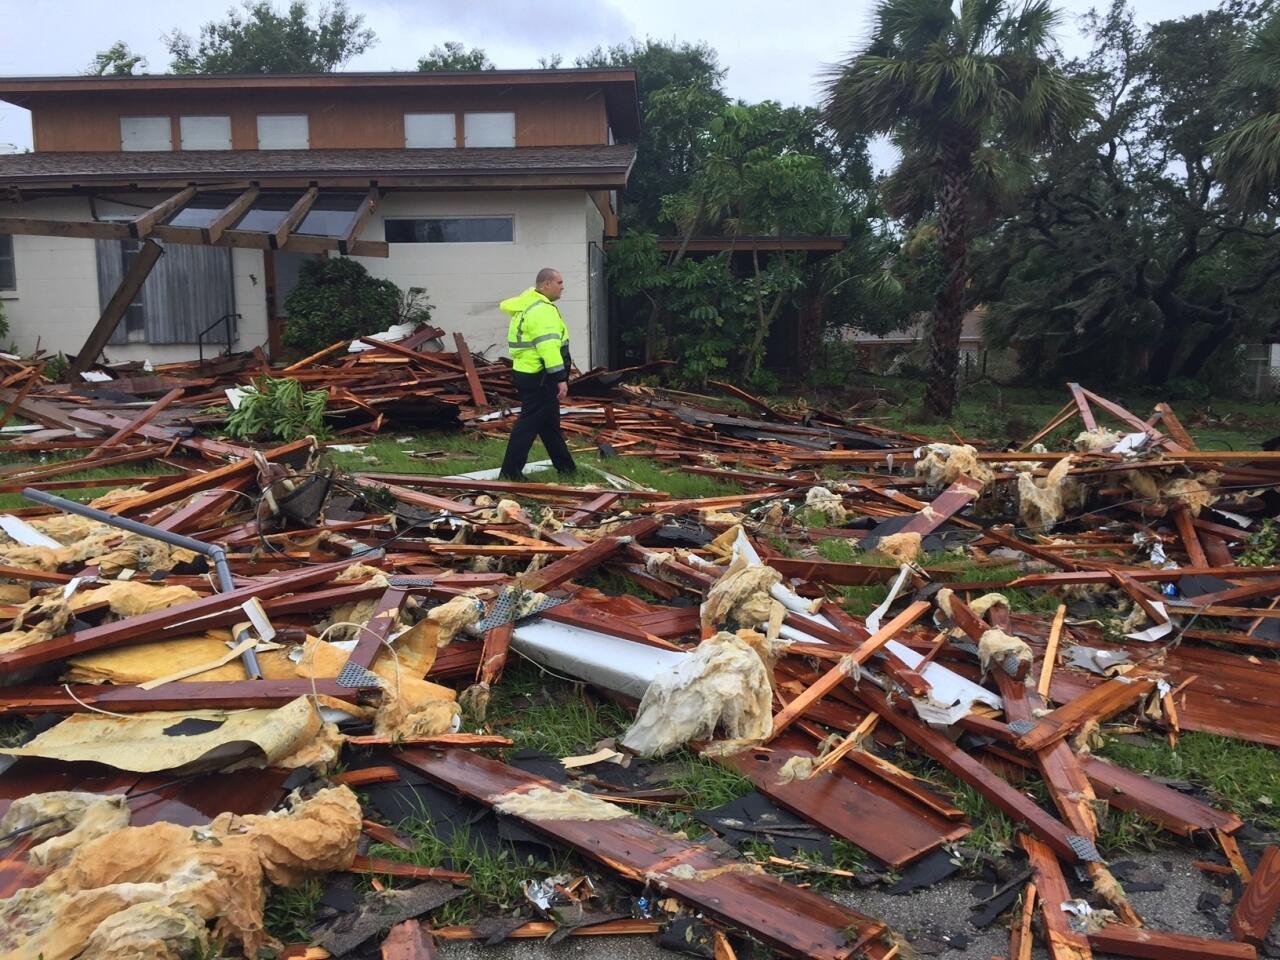 Palm Bay officer Dustin Terkoski walks over debris from a two-story home at Palm Point Subdivision in Brevard County, Fla., after a tornado touched down on Sept. 10, 2017.